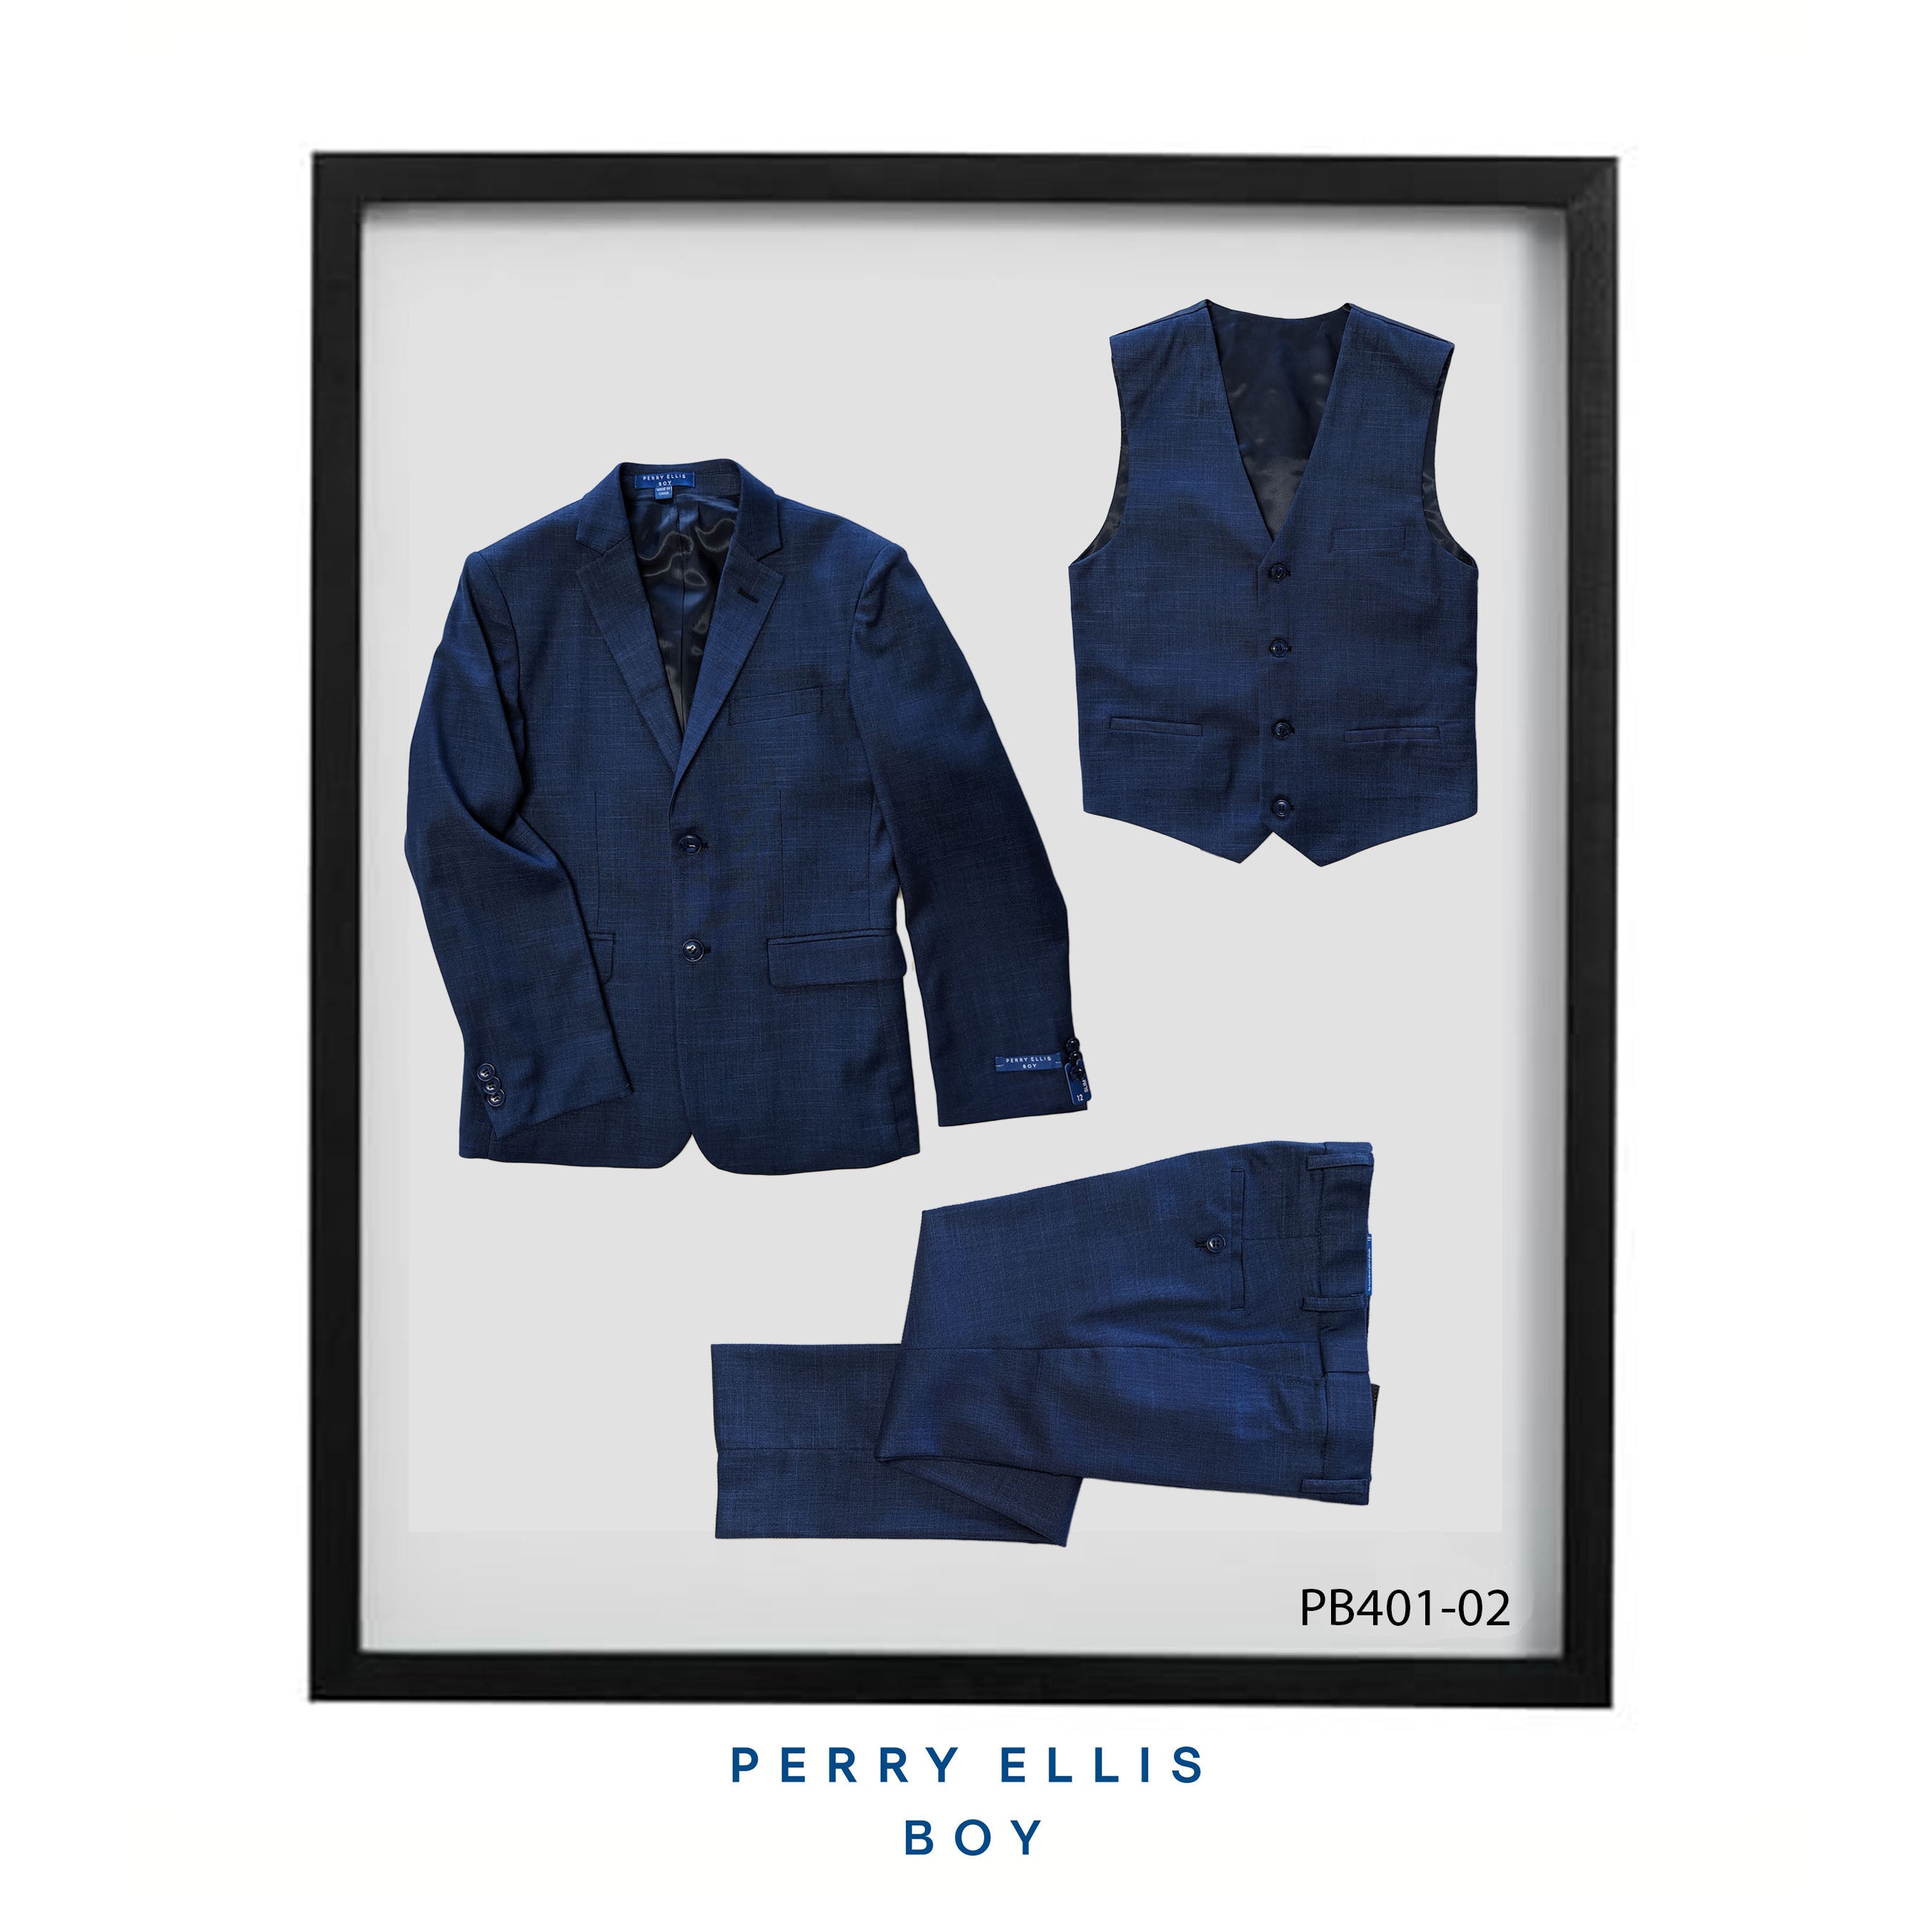 Blue 3 Piece Perry Ellis Textured Suits For Boys PB401-02